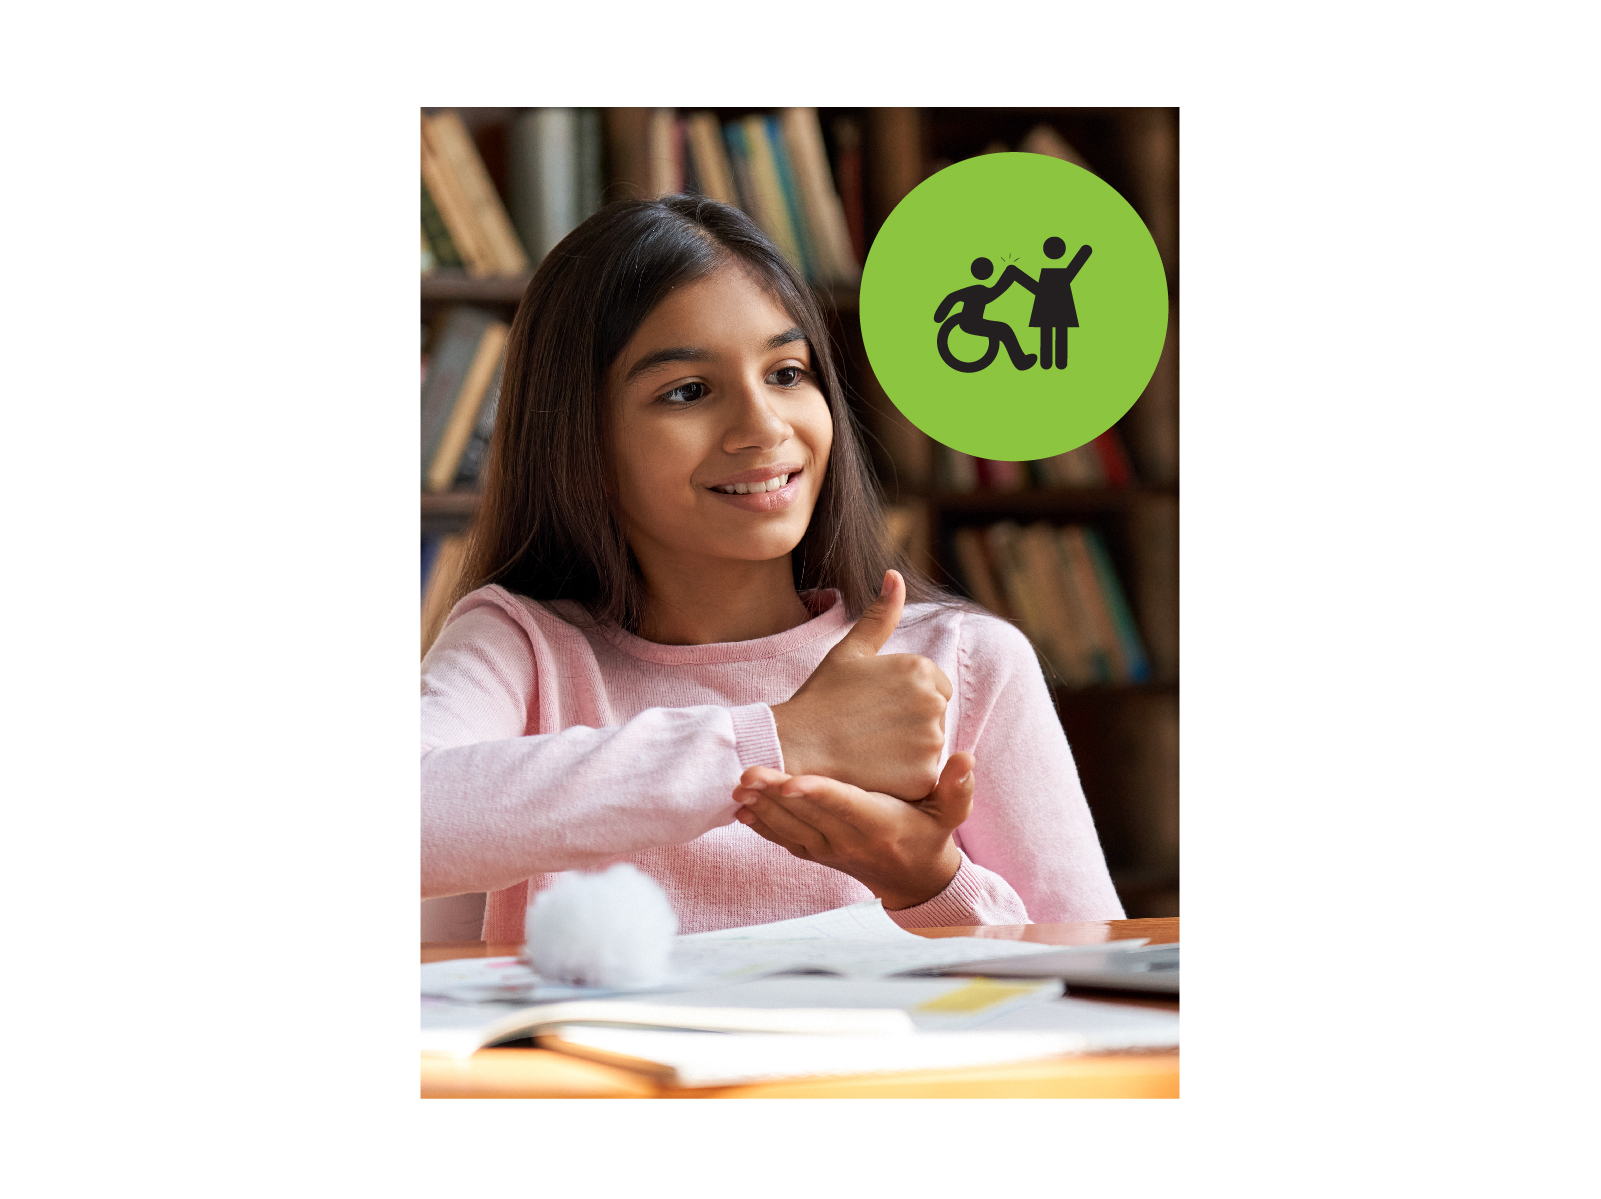 Teenage girl looking off camera, using sign langauge. Small green circle icon with graphic of person in a wheelchair high-fiving a person that is standing.